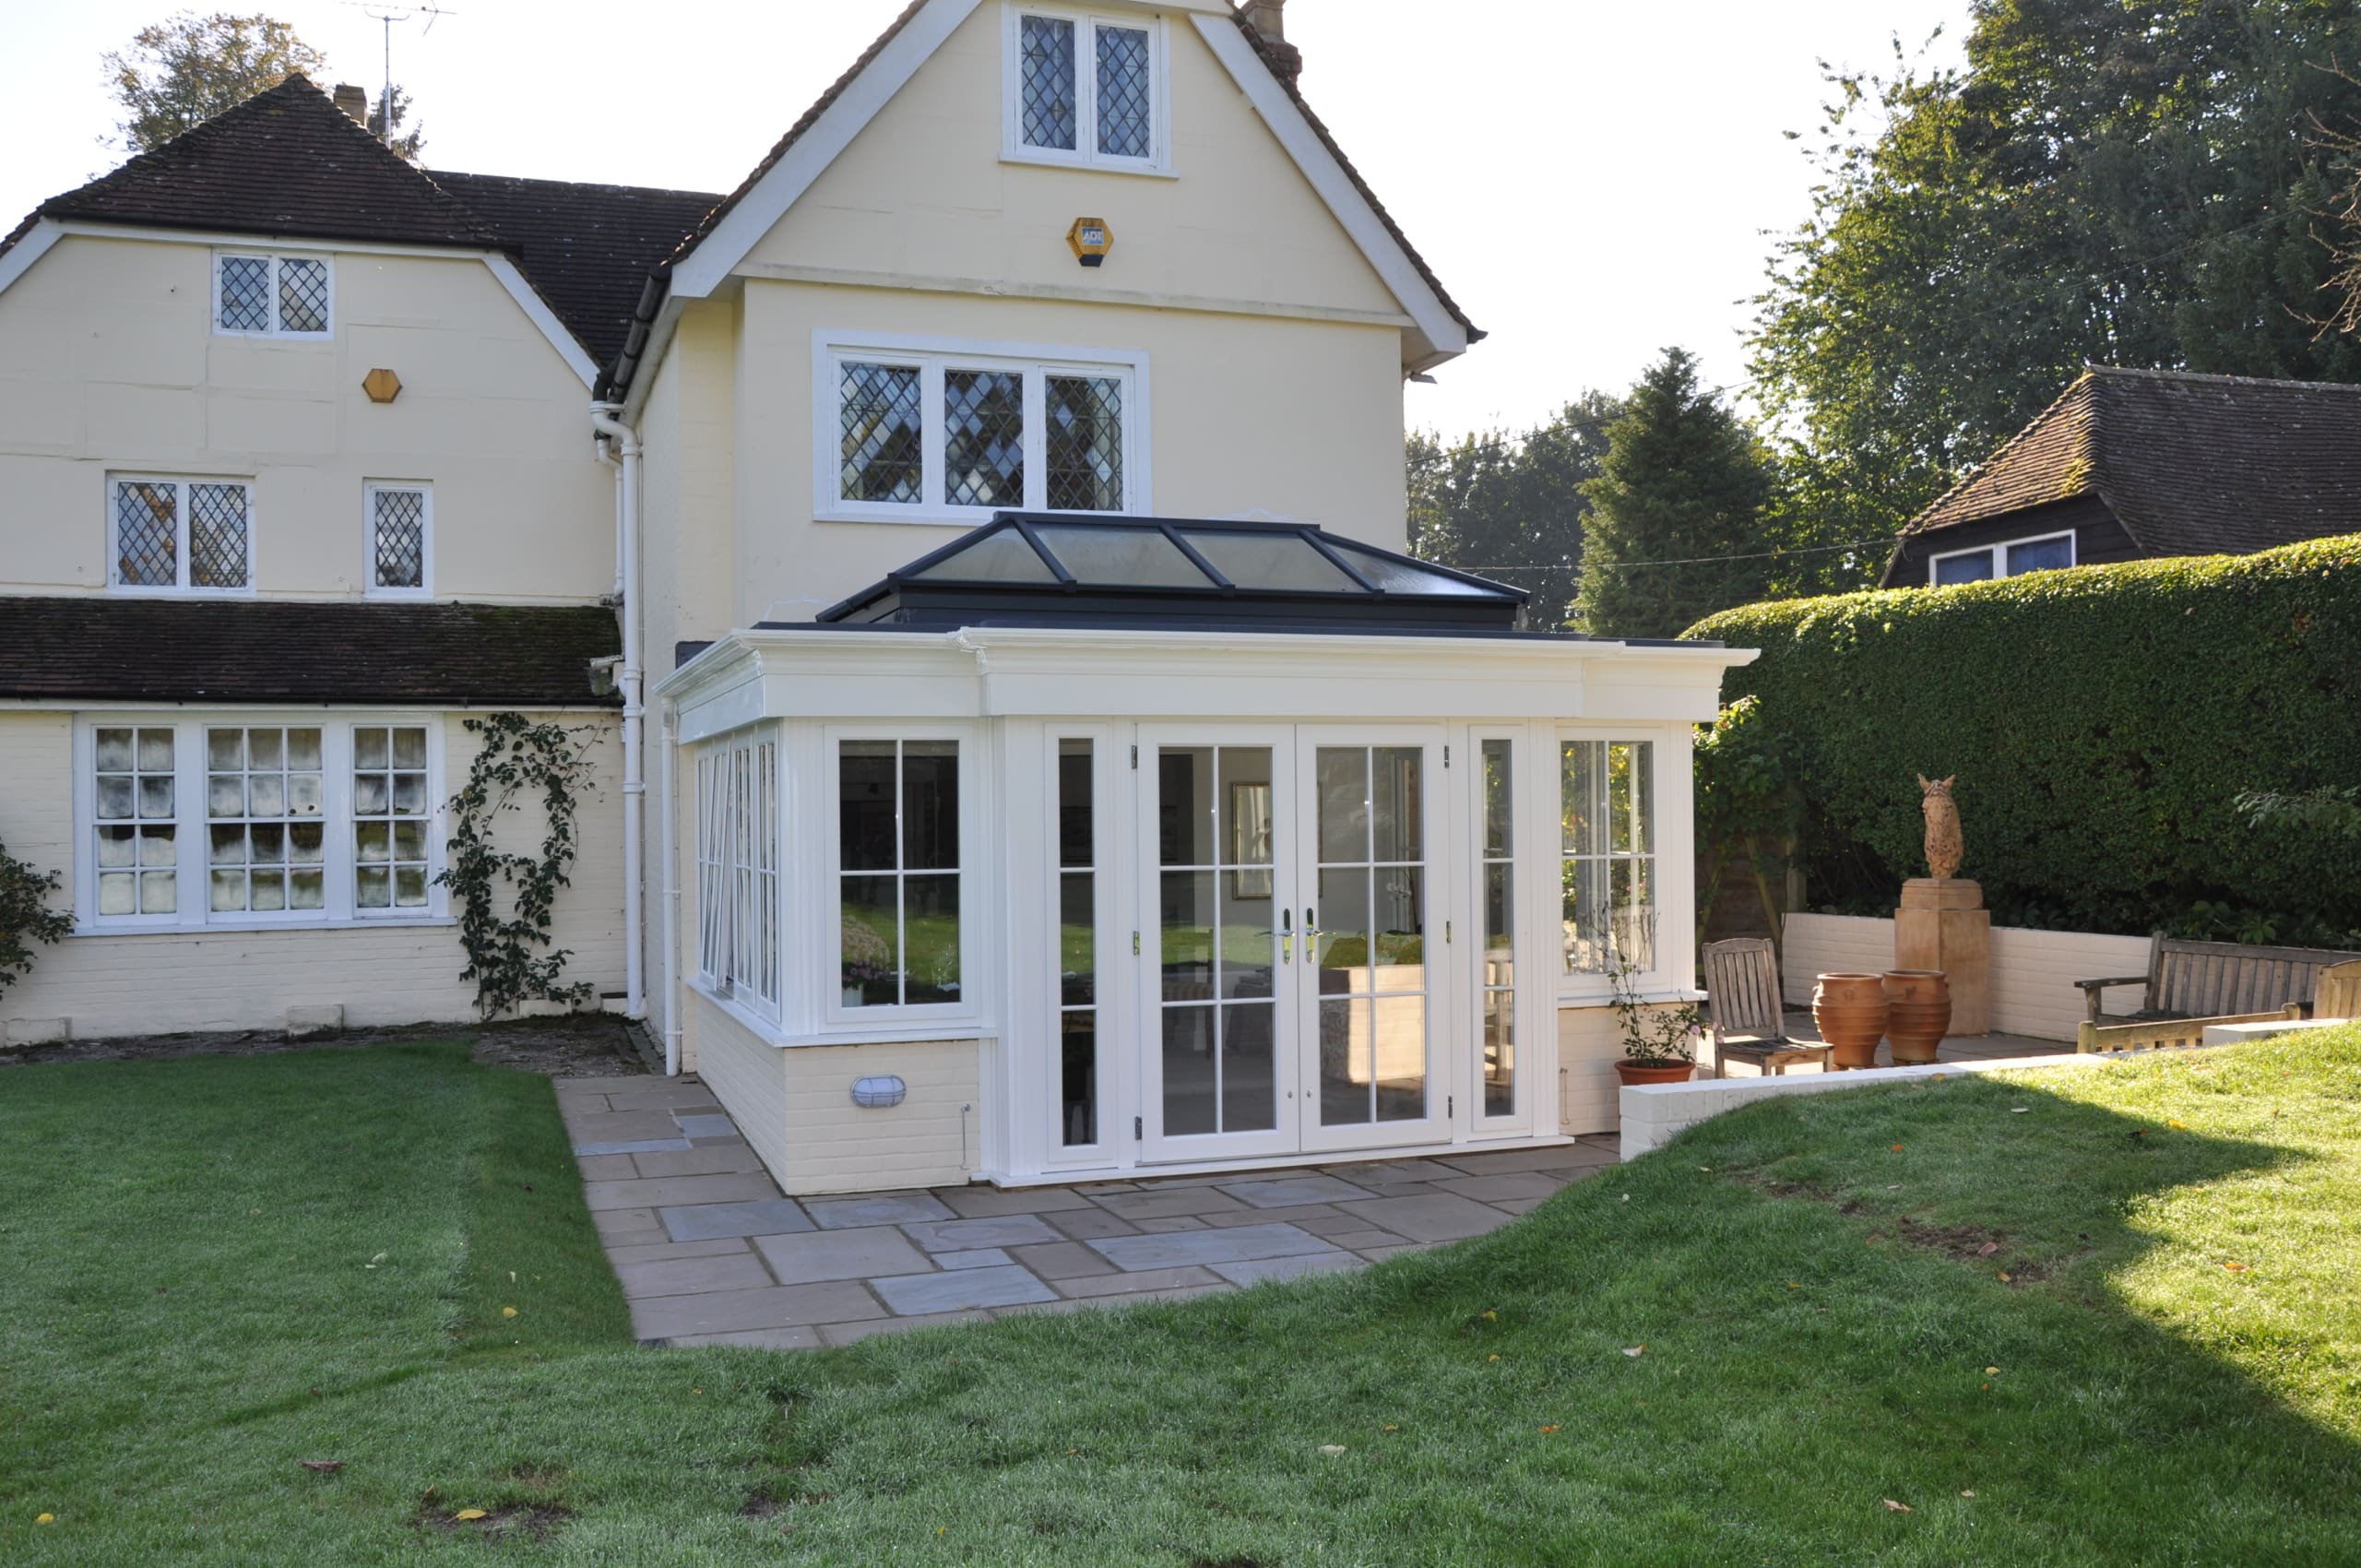 Substantial property on a warm autumnal morning with orangery and roof lantern.